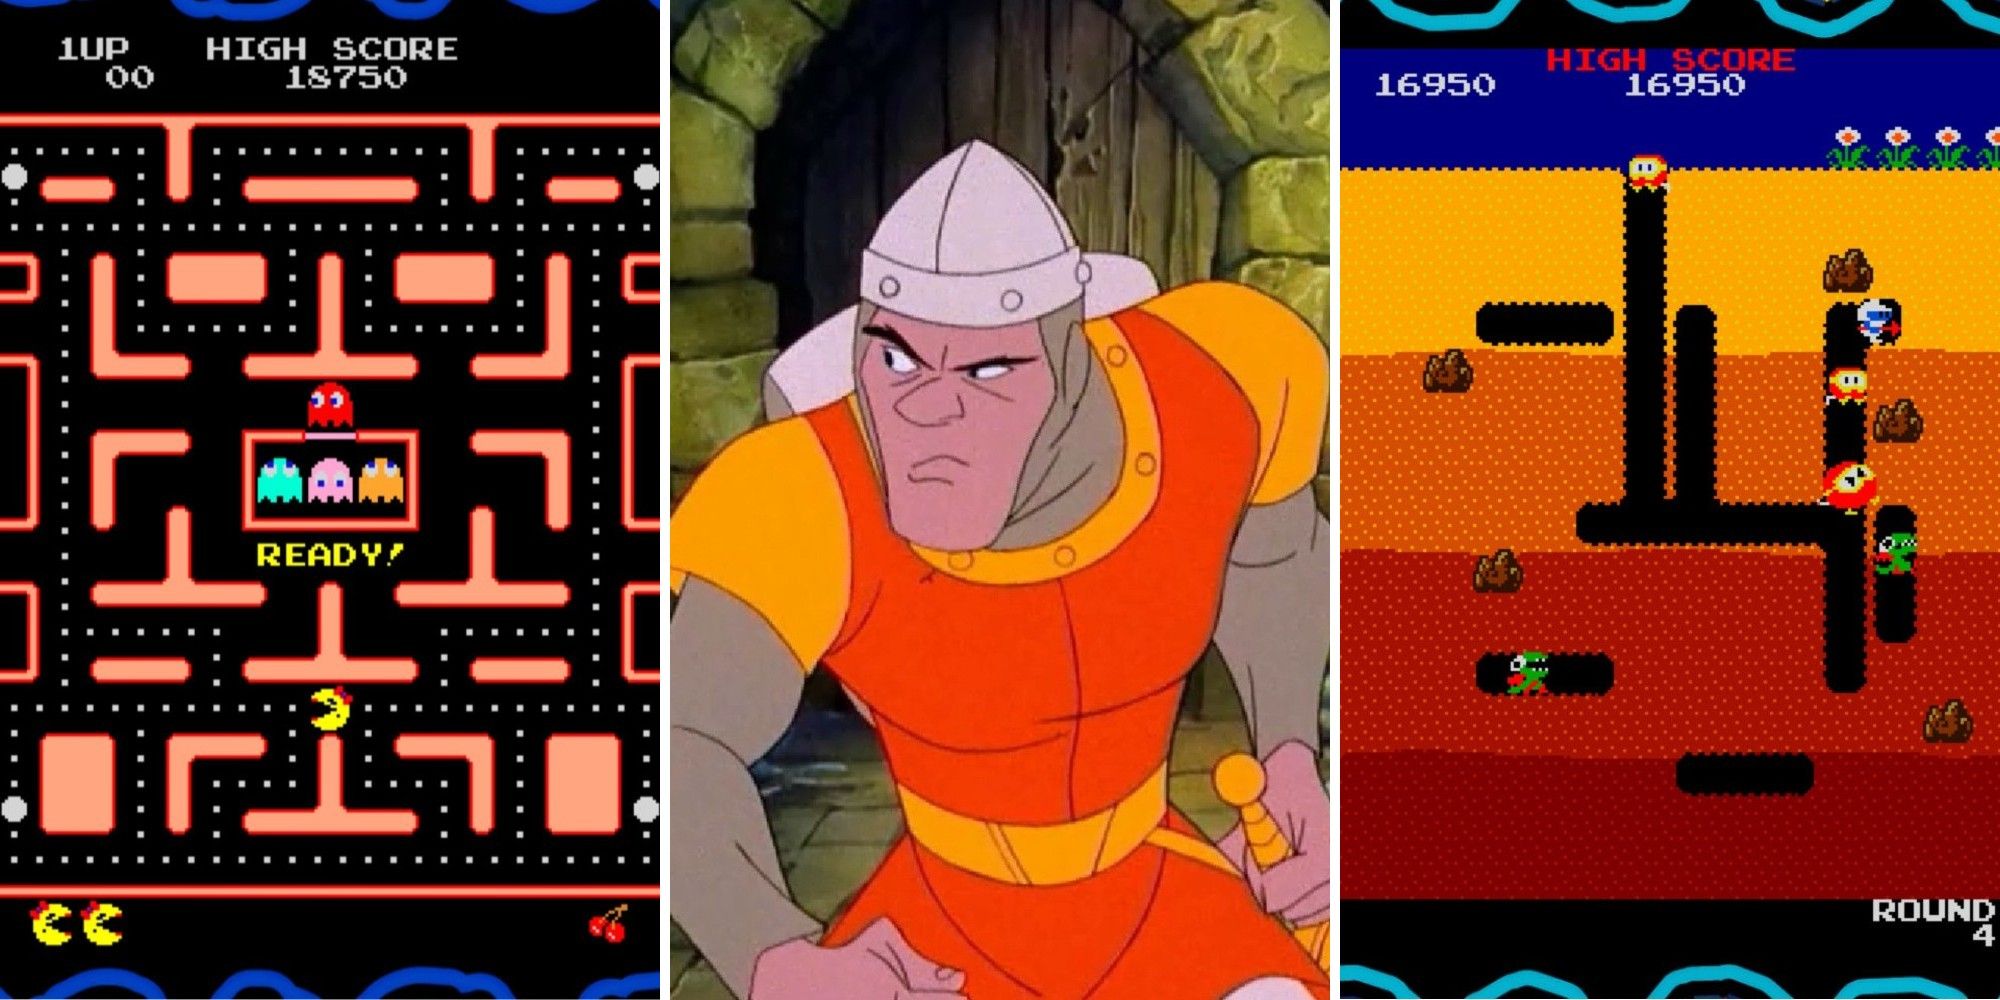 Golden Age Arcade Games Ms PacMan, Dragons Lair, Dig Dug